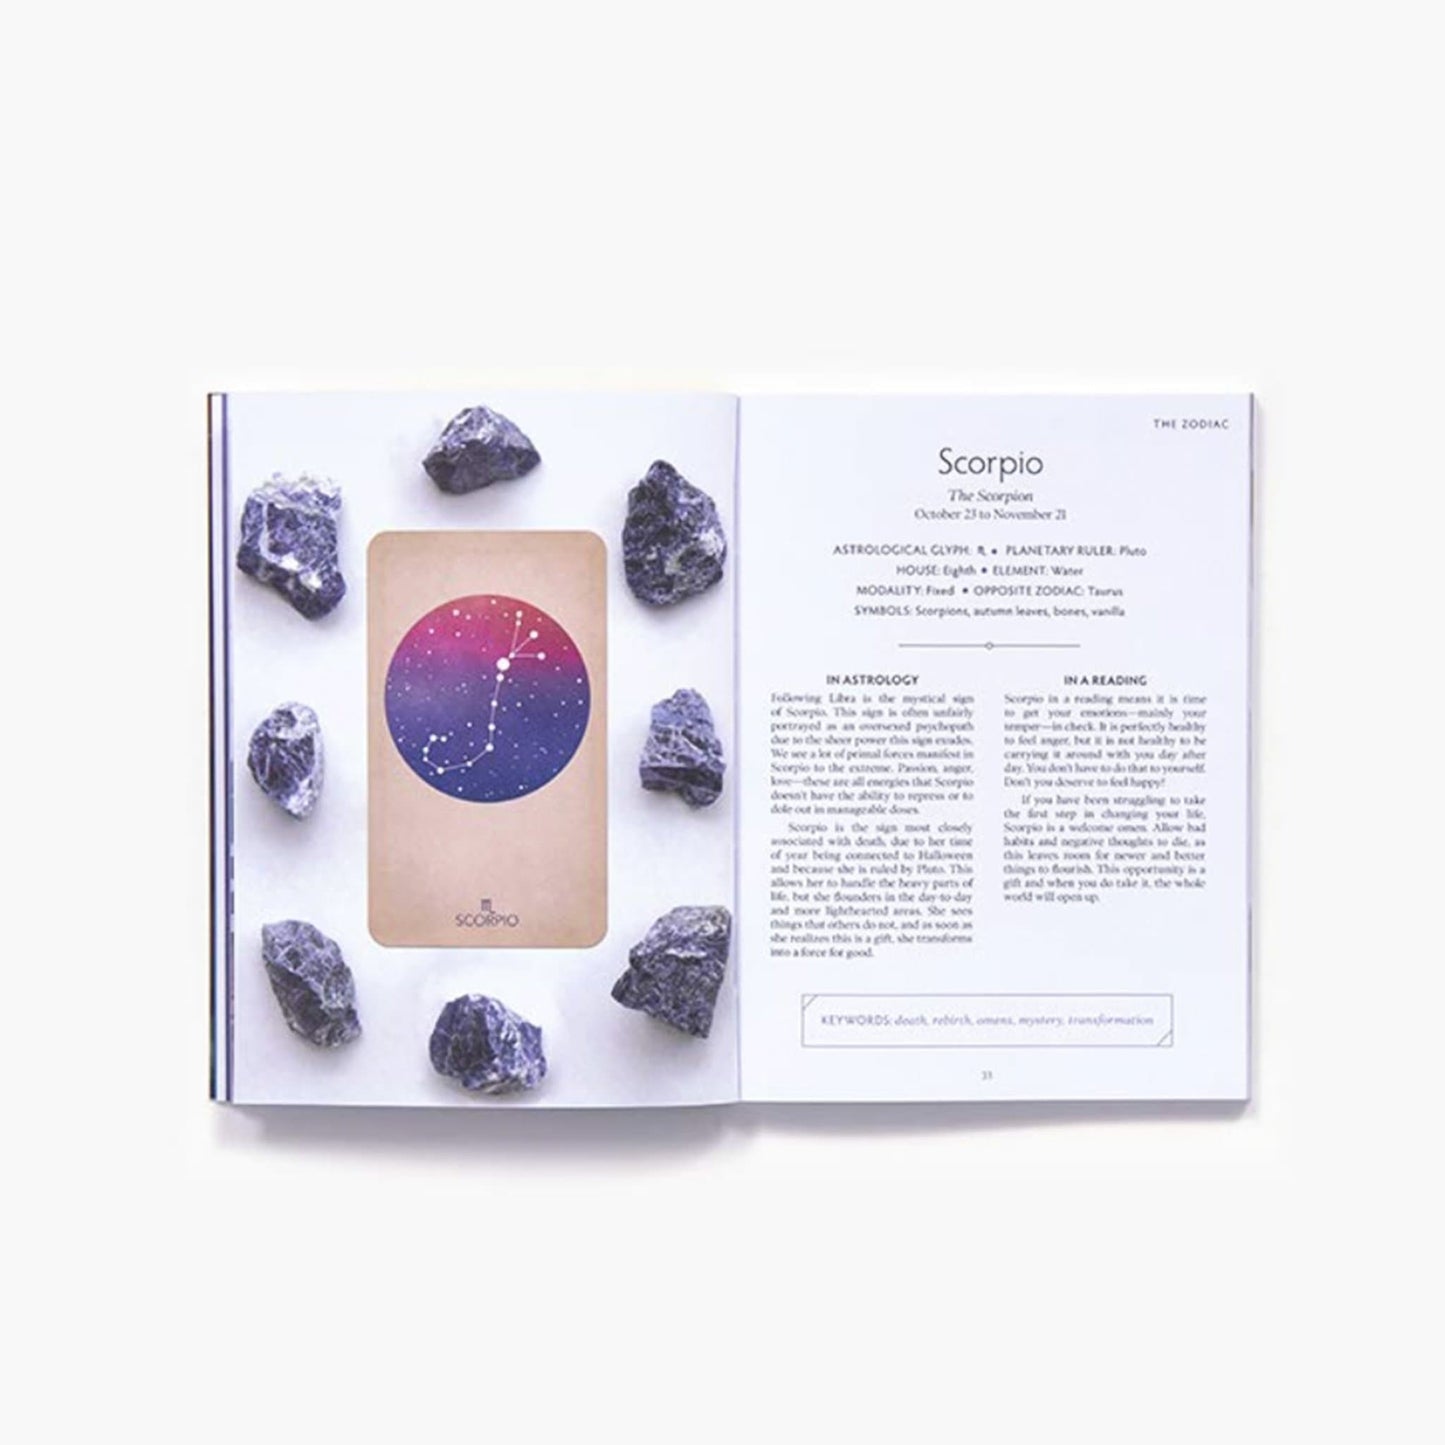 Arcana of Astrology Boxed Set: Oracle Deck and Guidebook for Cosmic Insight - Muse + Moonstone